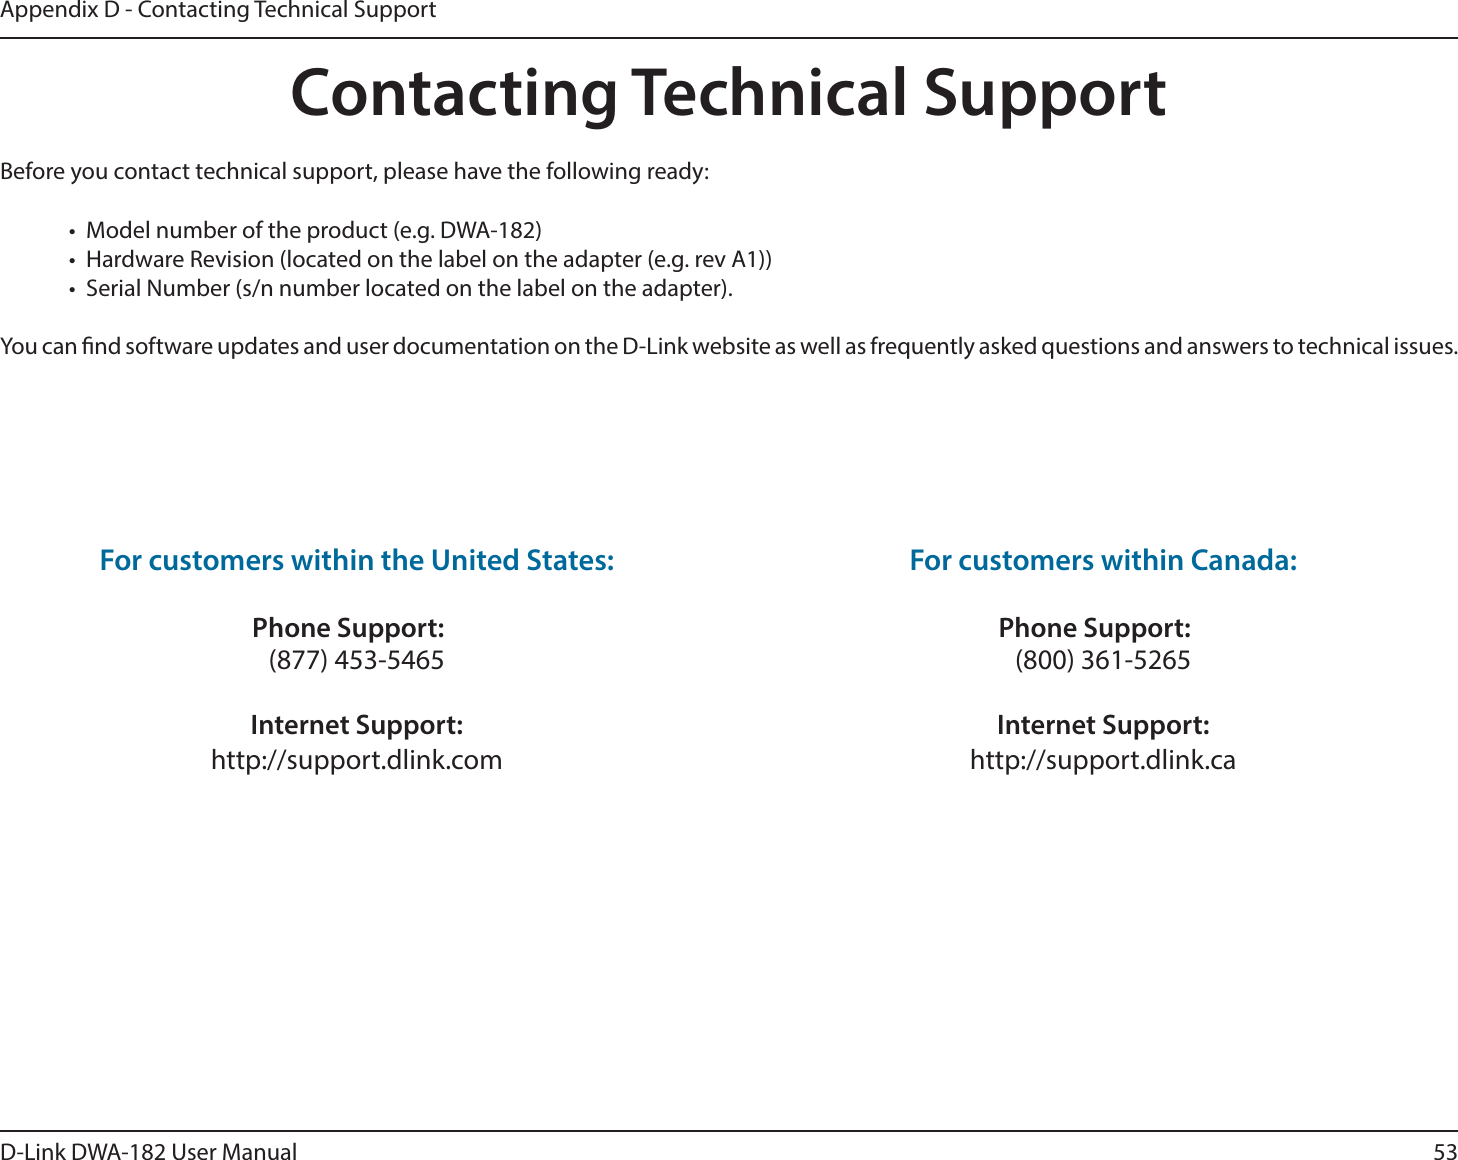 53D-Link DWA-182 User ManualAppendix D - Contacting Technical SupportContacting Technical Support#FGPSFZPVDPOUBDUUFDIOJDBMTVQQPSUQMFBTFIBWFUIFGPMMPXJOHSFBEZt .PEFMOVNCFSPGUIFQSPEVDUFH%8&quot;t )BSEXBSF3FWJTJPOMPDBUFEPOUIFMBCFMPOUIFBEBQUFSFHSFW&quot;t 4FSJBM/VNCFSTOOVNCFSMPDBUFEPOUIFMBCFMPOUIFBEBQUFSYou can nd software updates and user documentation on the D-Link website as well as frequently asked questions and answers to technical issues.For customers within the United States: Phone Support: (877) 453-5465 Internet Support: IUUQTVQQPSUEMJOLDPN For customers within Canada: Phone Support: (800) 361-5265   Internet Support: IUUQTVQQPSUEMJOLDB 